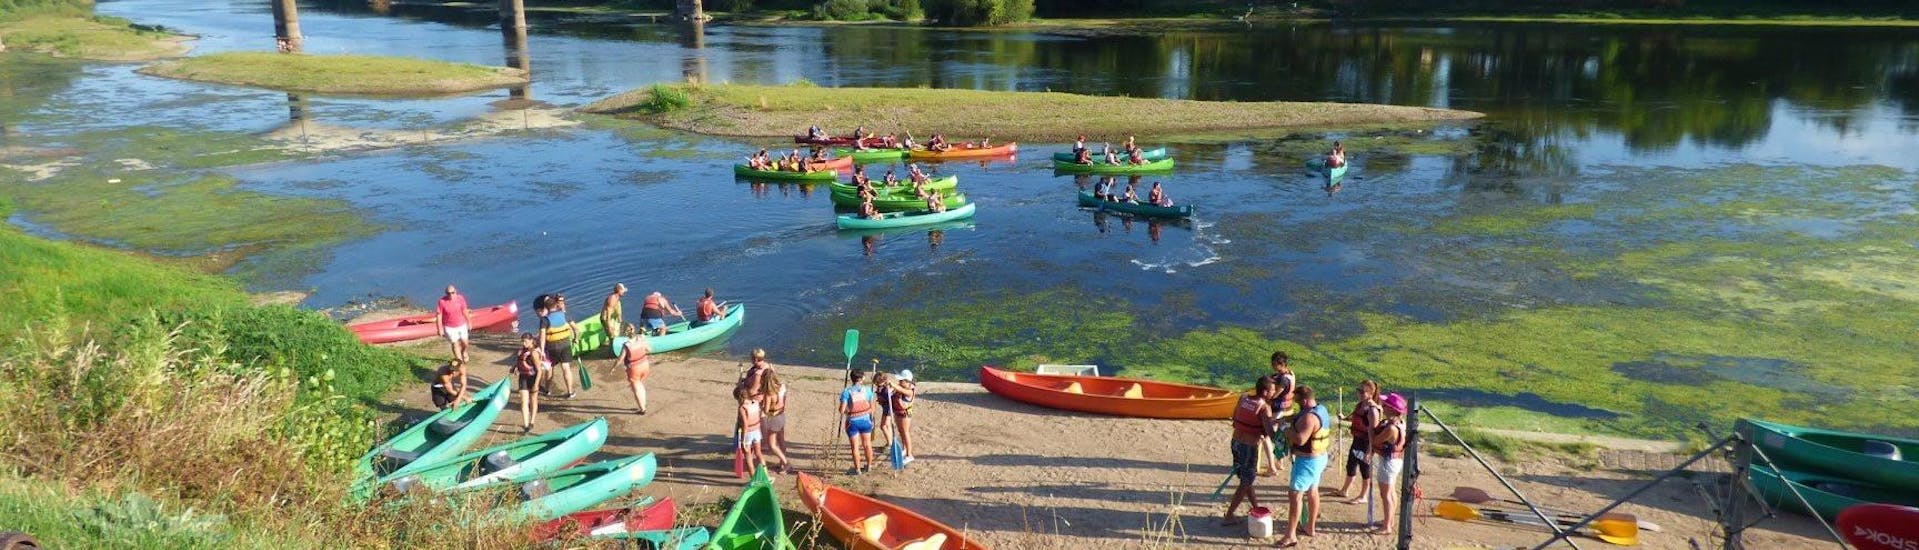 Holidaymakers are getting into the water for their 7km Canoe Rental on the Dordogne to Port-Sainte-Foy with Canoe Kayak Port-Sainte-Foy.